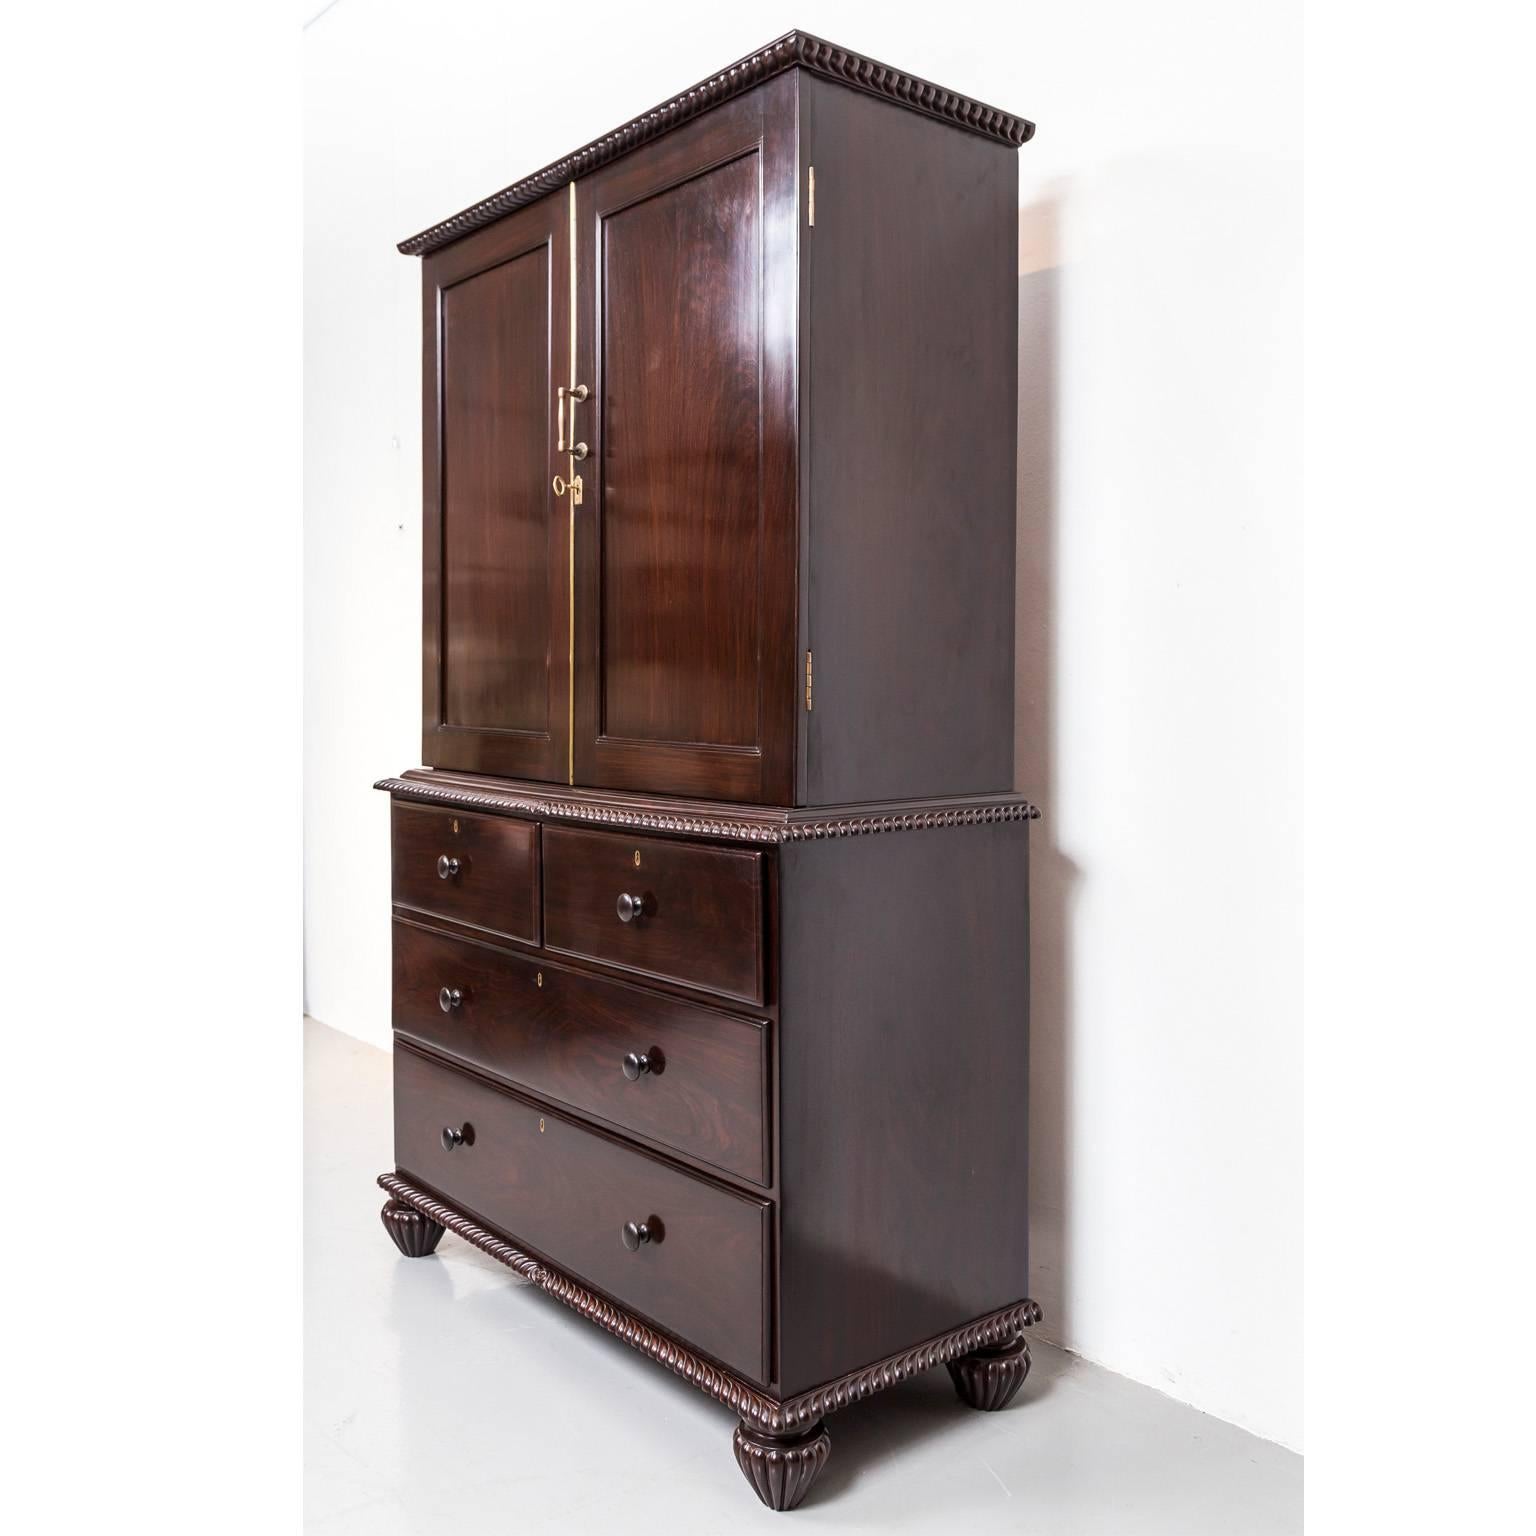 Anglo-Indian or British Colonial Rosewood Cupboard 1